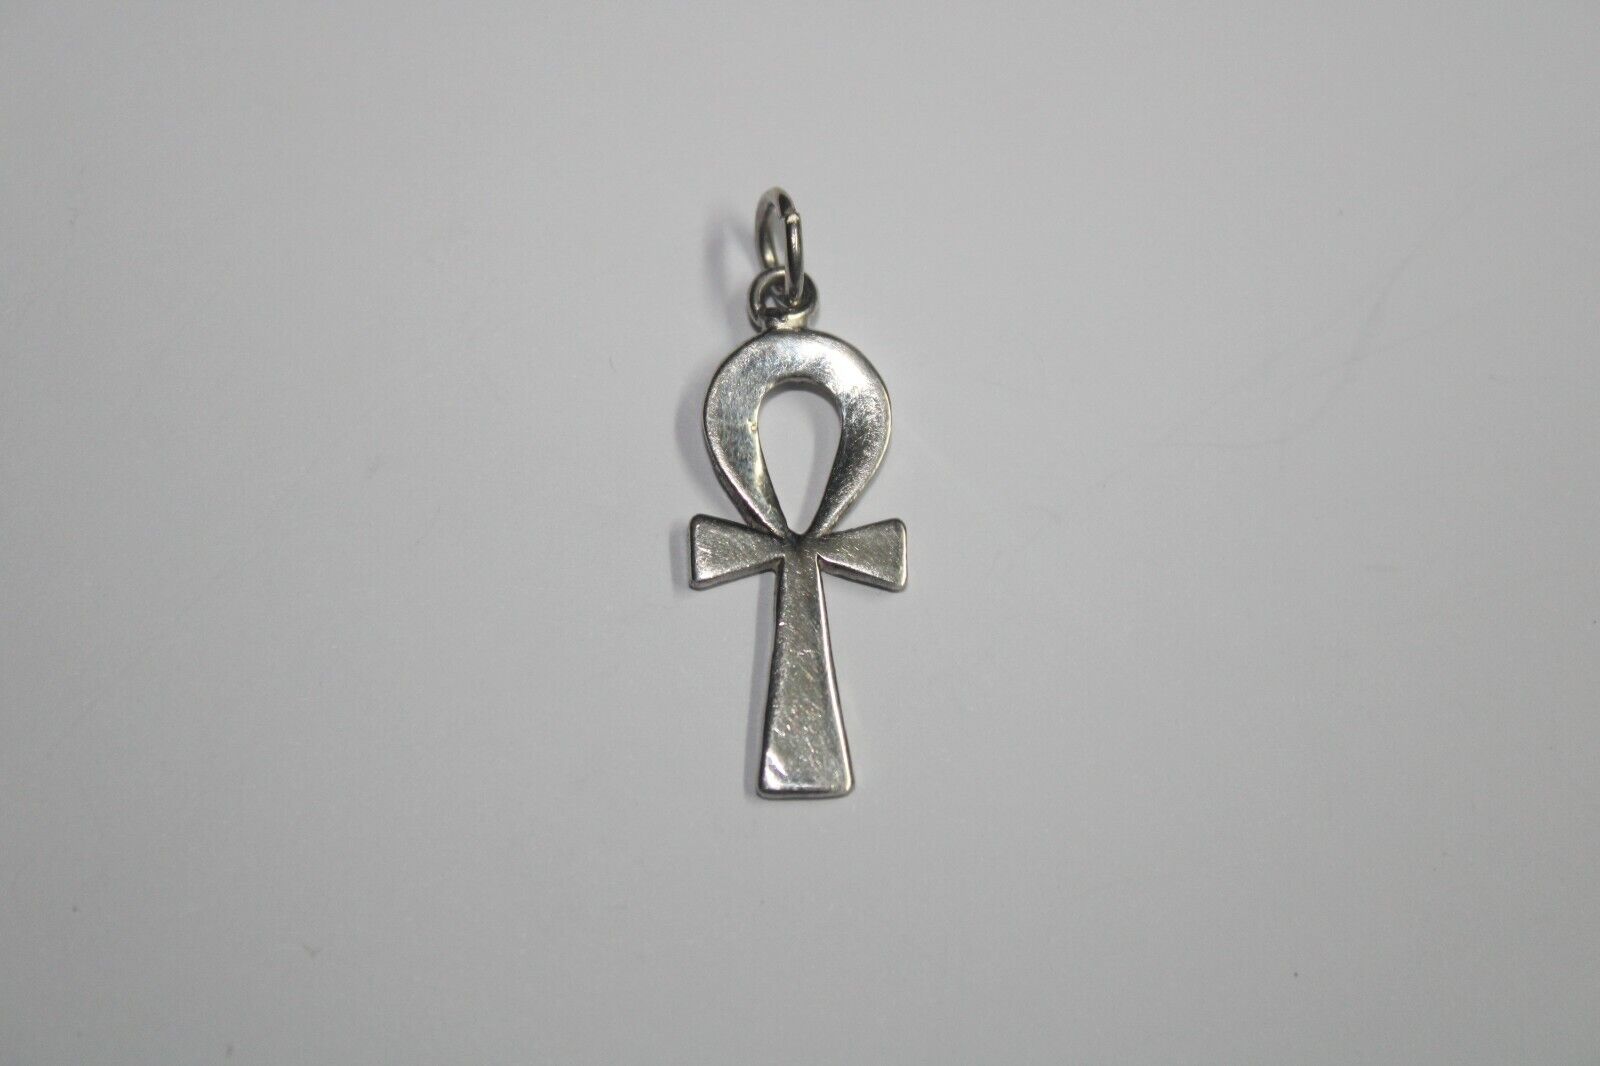 EGYPTIAN ANKH 925 STERLING Silver - Key of Life Symbol Good Luck Pendant New